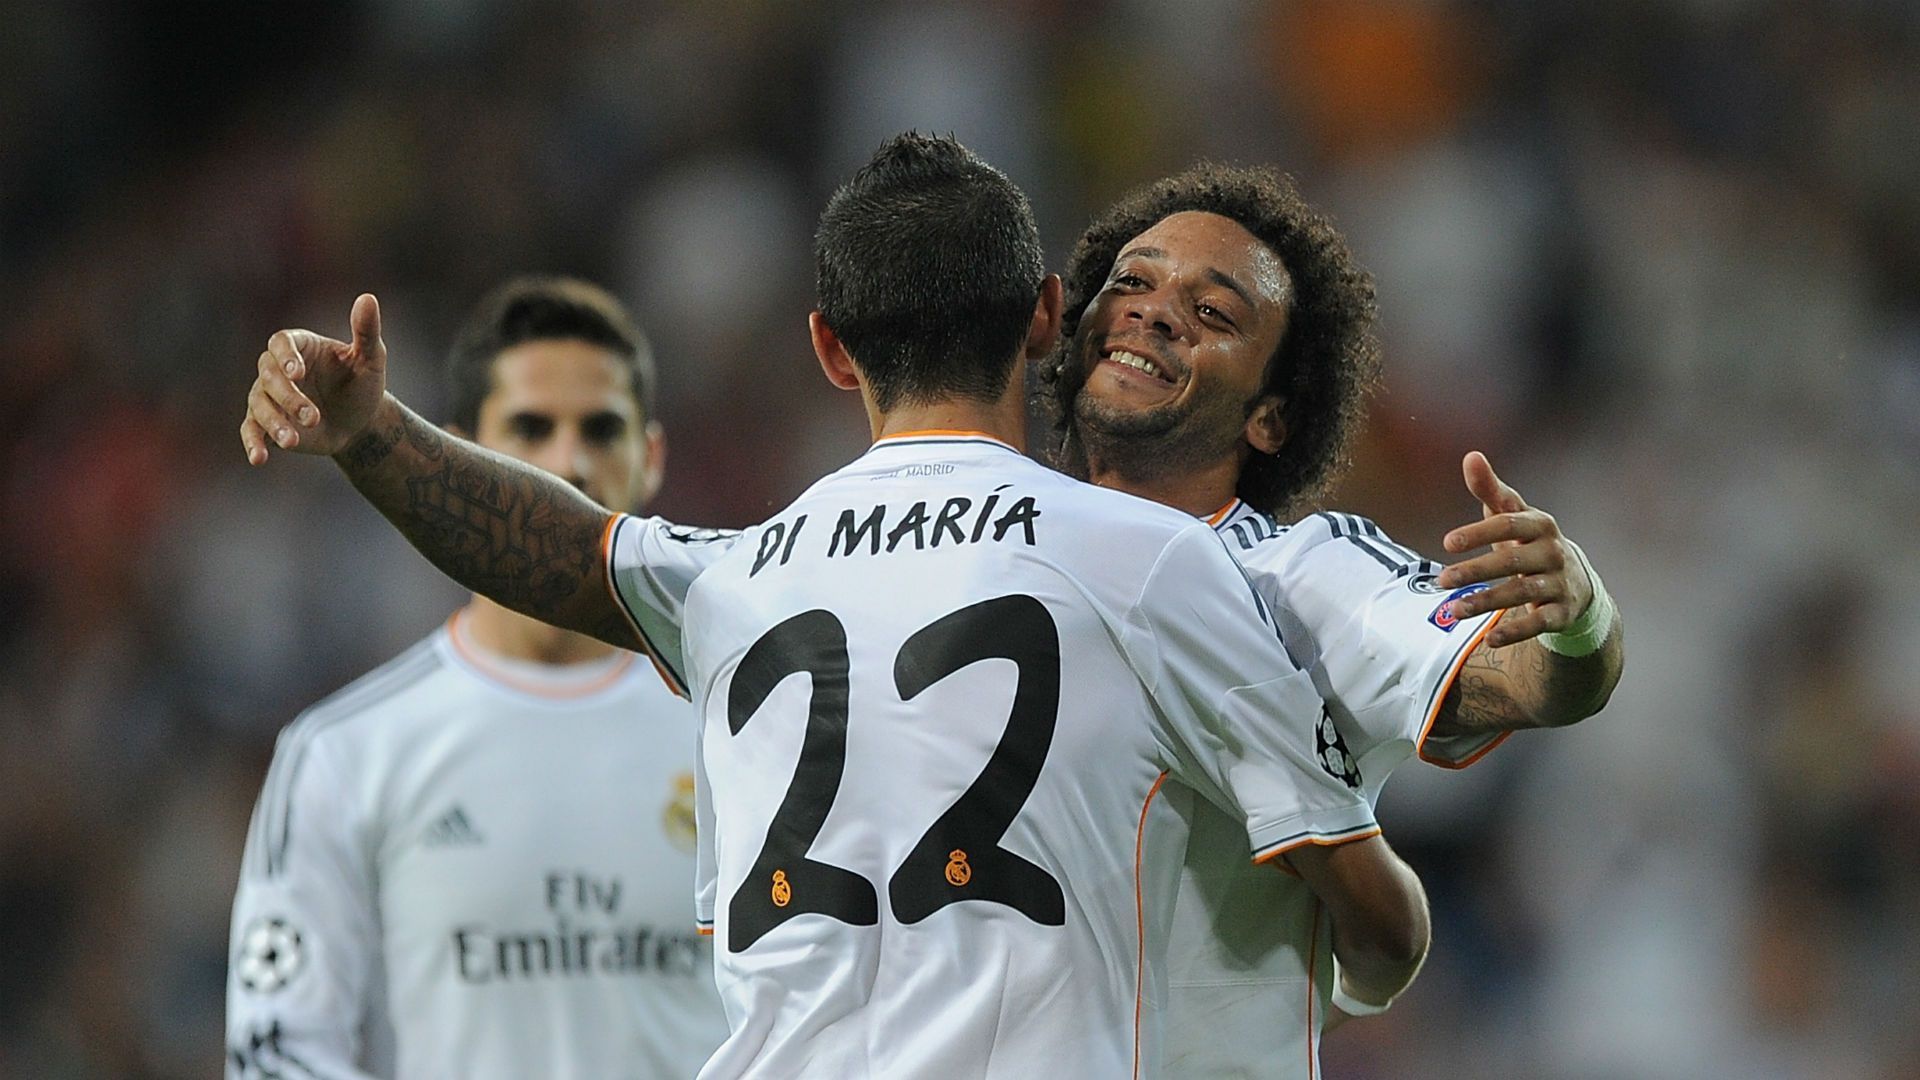 Angel Di Maria (#22) and Marcelo embrace in celebration after a Real Madrid goal.